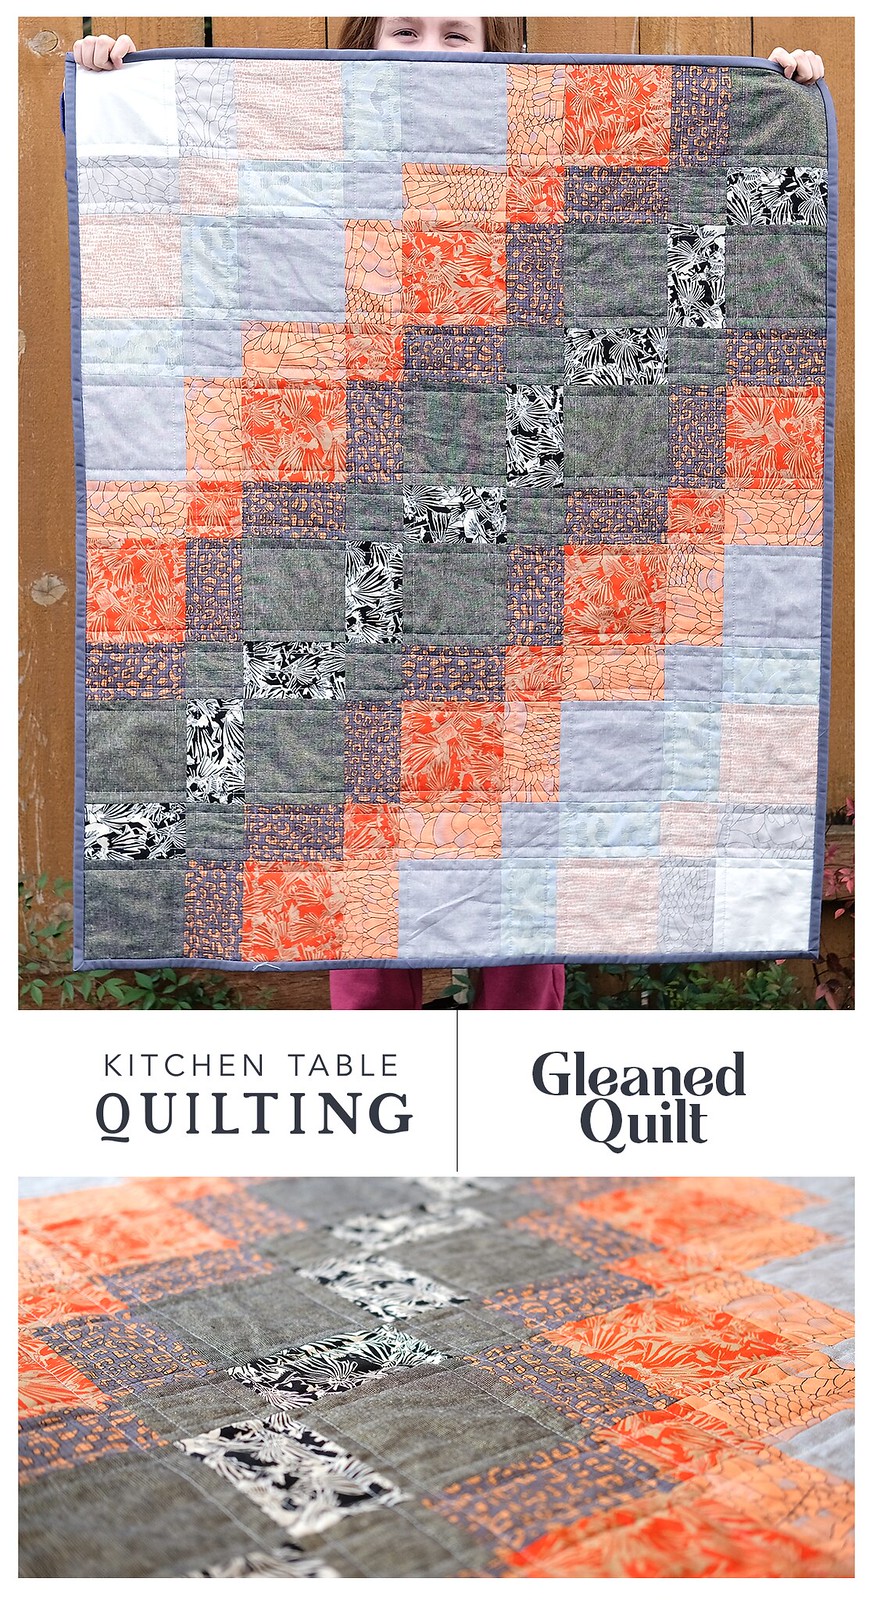 Gleaned Baby Quilt - Kitchen Table Quilting